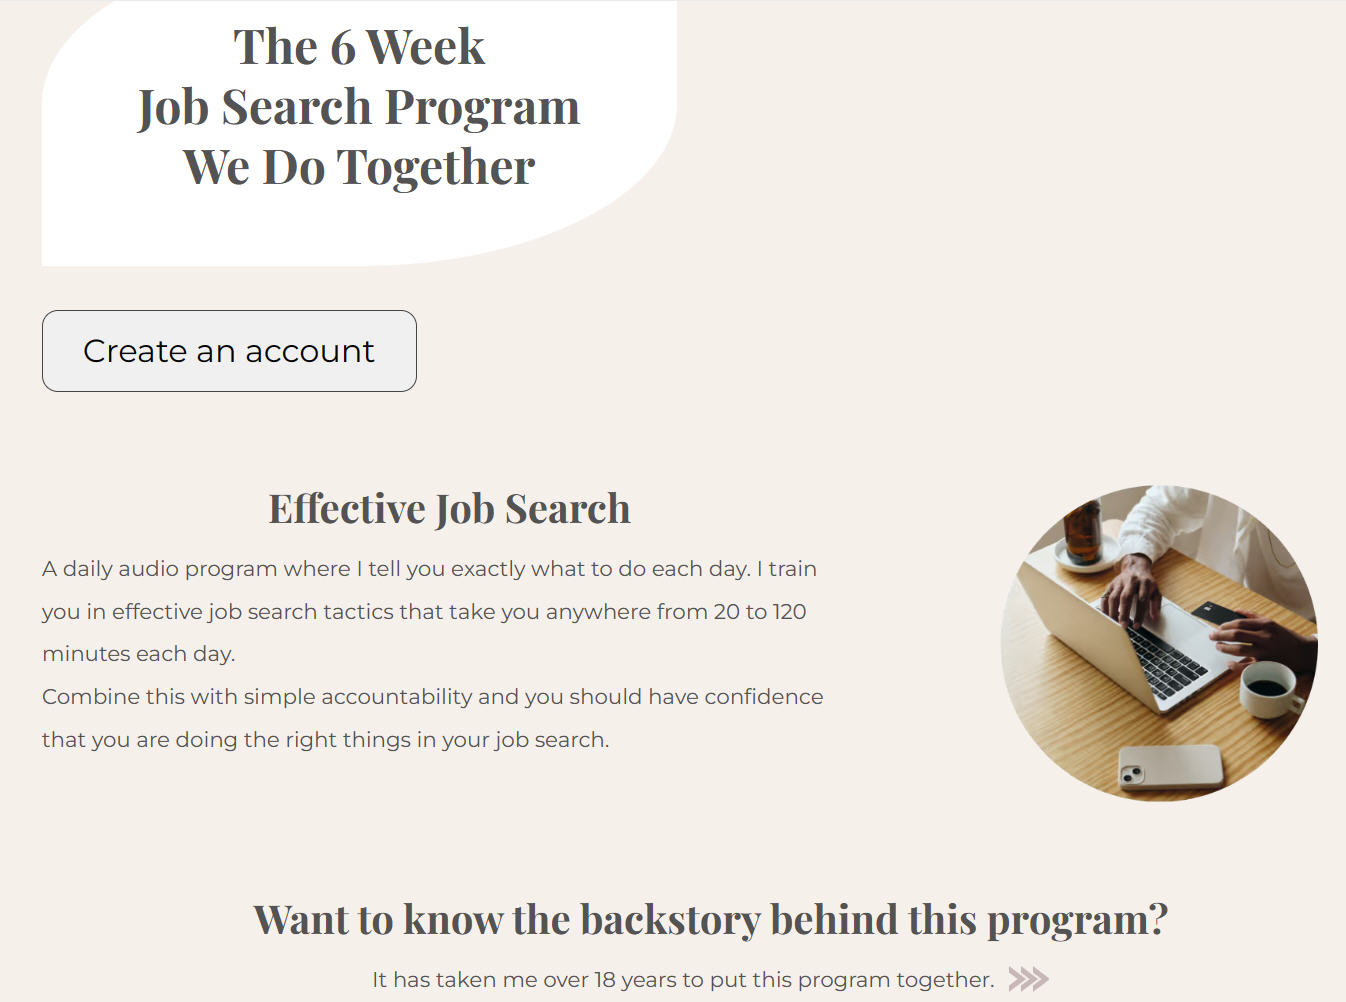 updated job search program launch